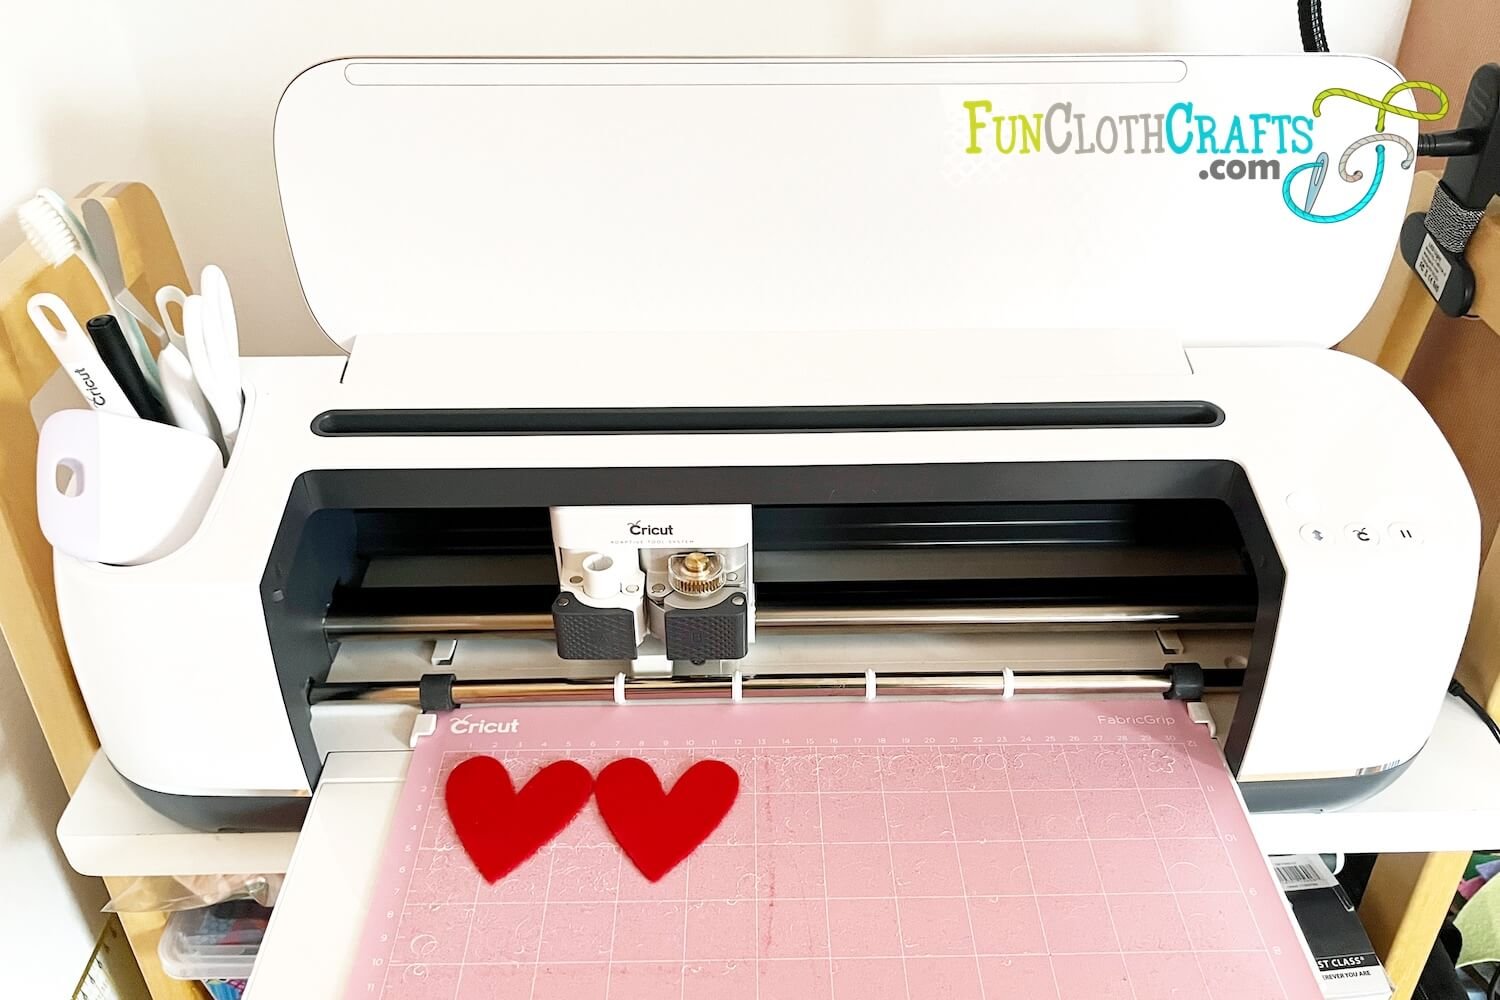 Cutting Felt with Cricut: A Beginners Guide - Makers Gonna Learn